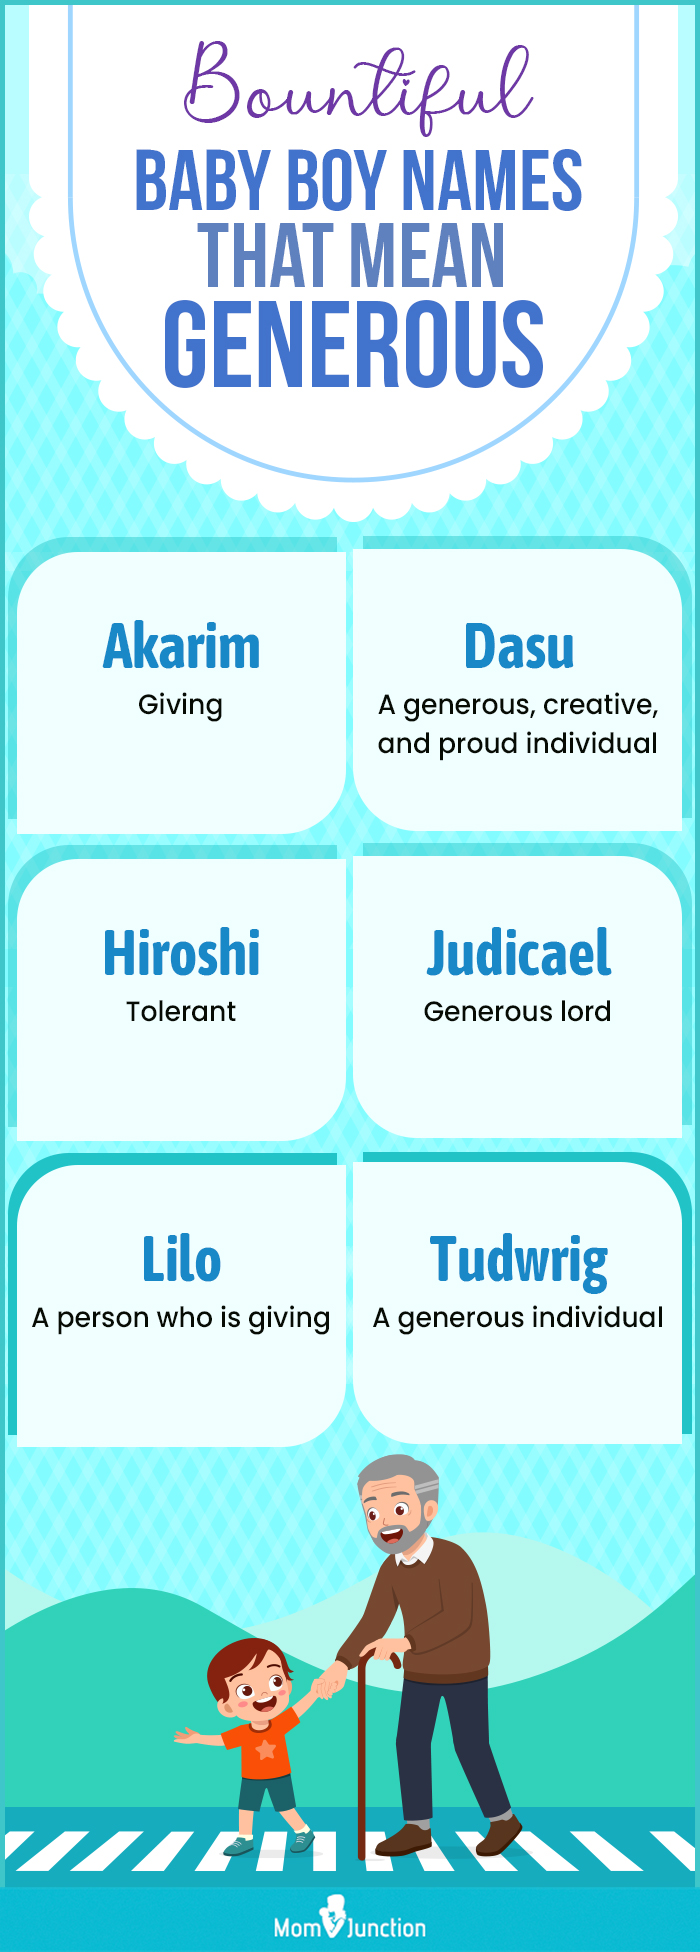 bountiful baby boy names that mean generous (infographic)